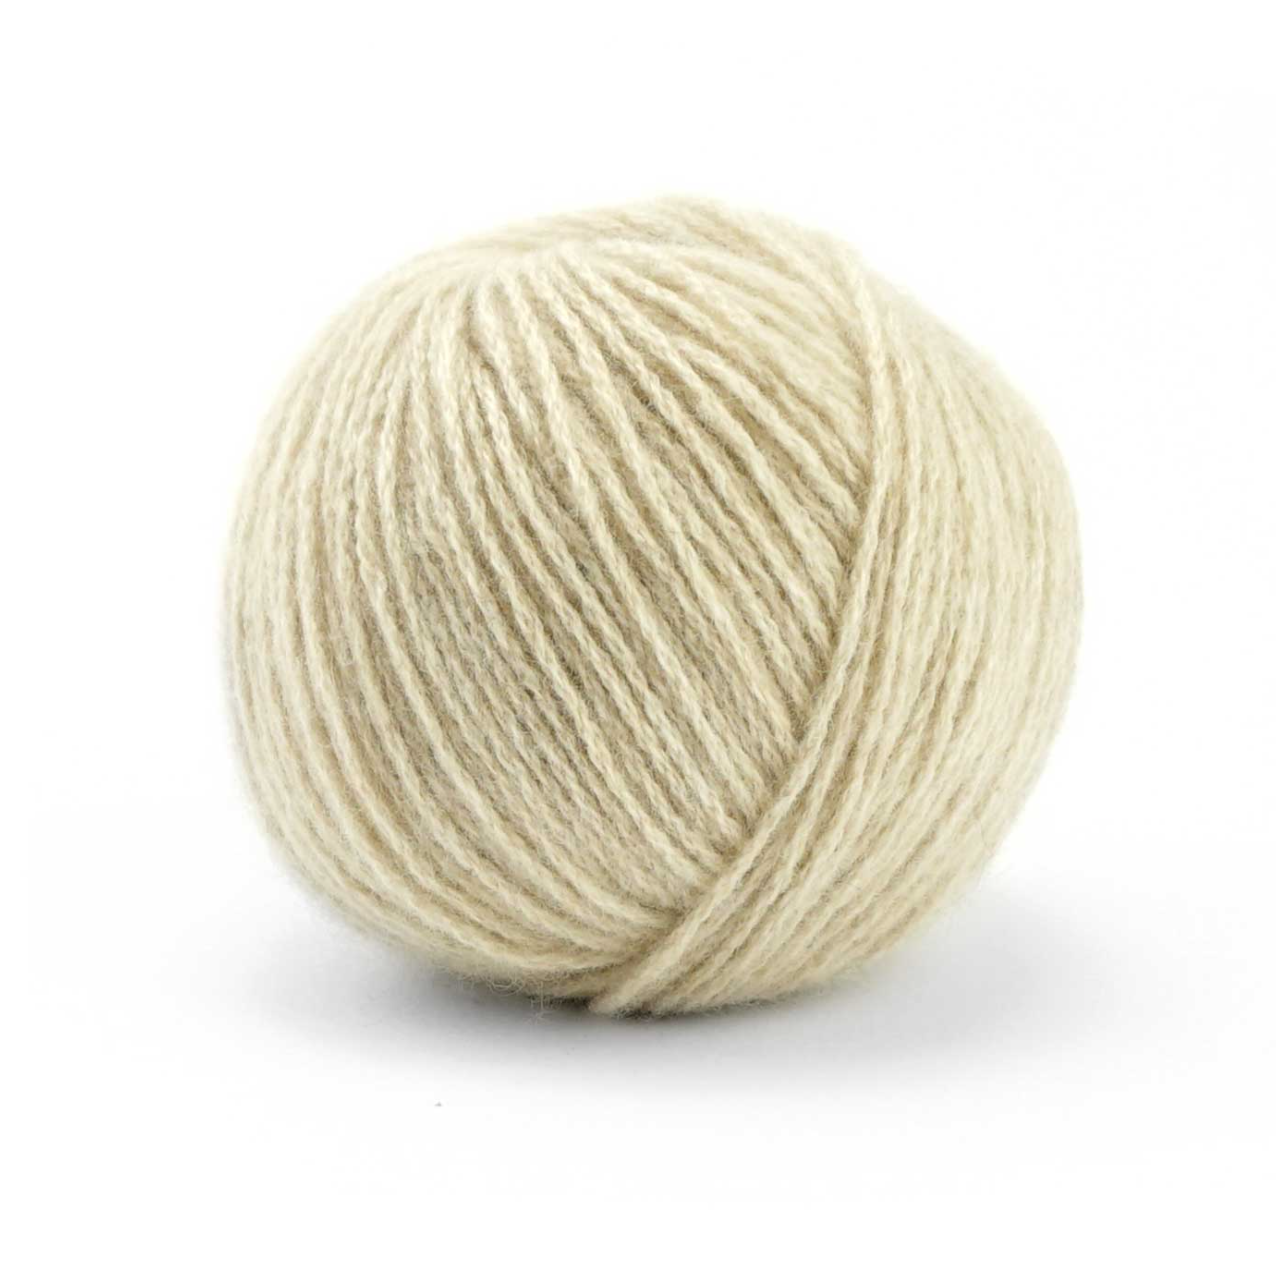 Yarn from Goat Fiber – Cashmere